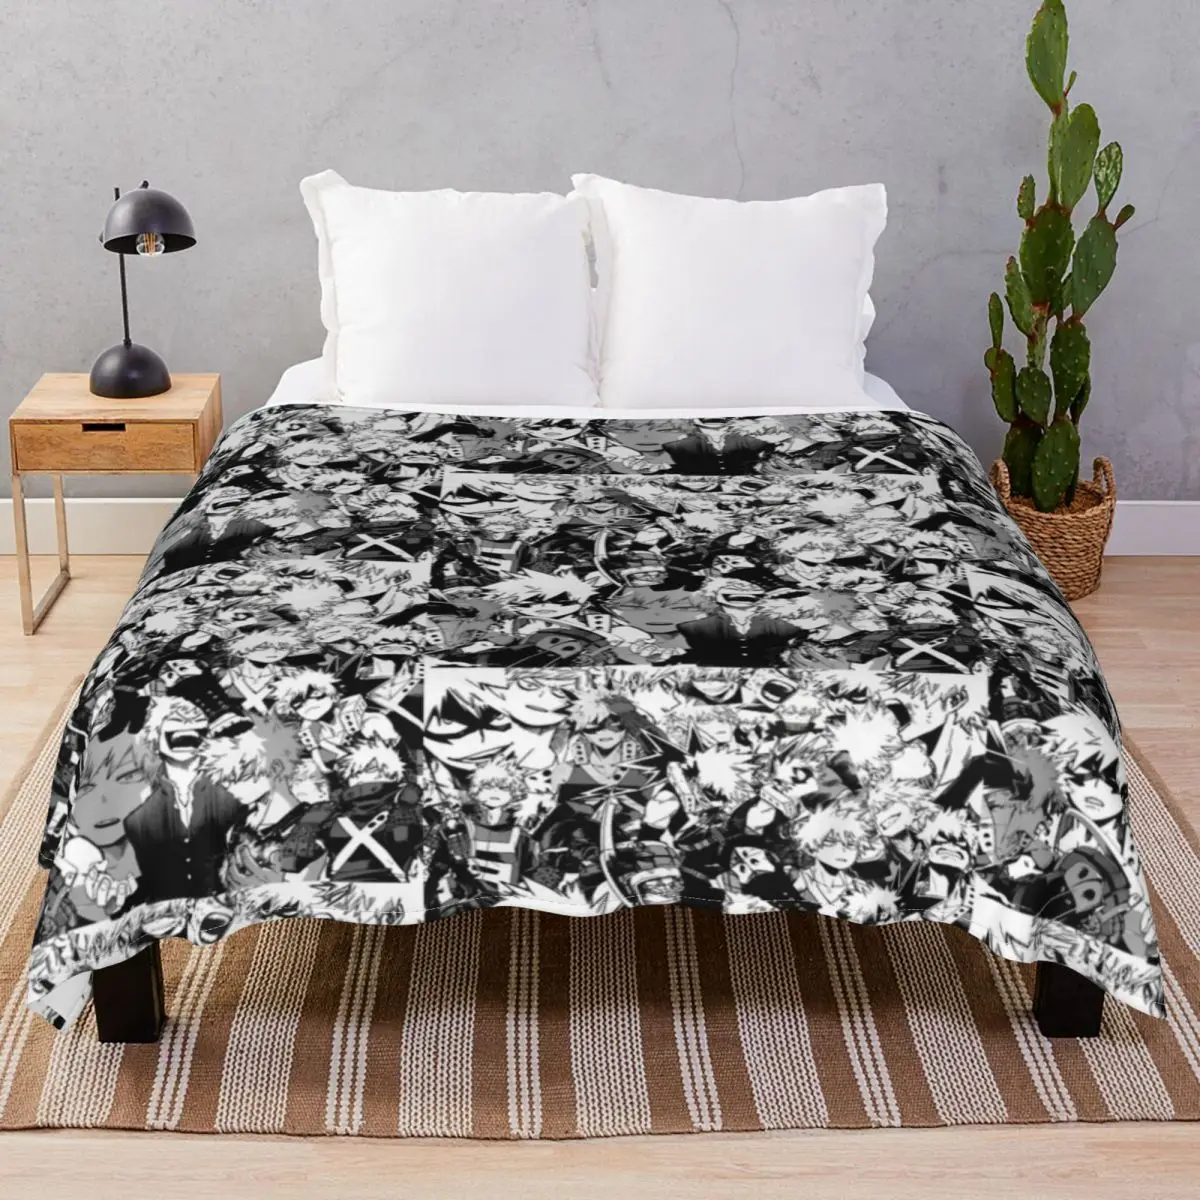 Katsuki Bakugou Blankets Flannel Printed Comfortable Throw Blanket for Bed Home Couch Travel Office